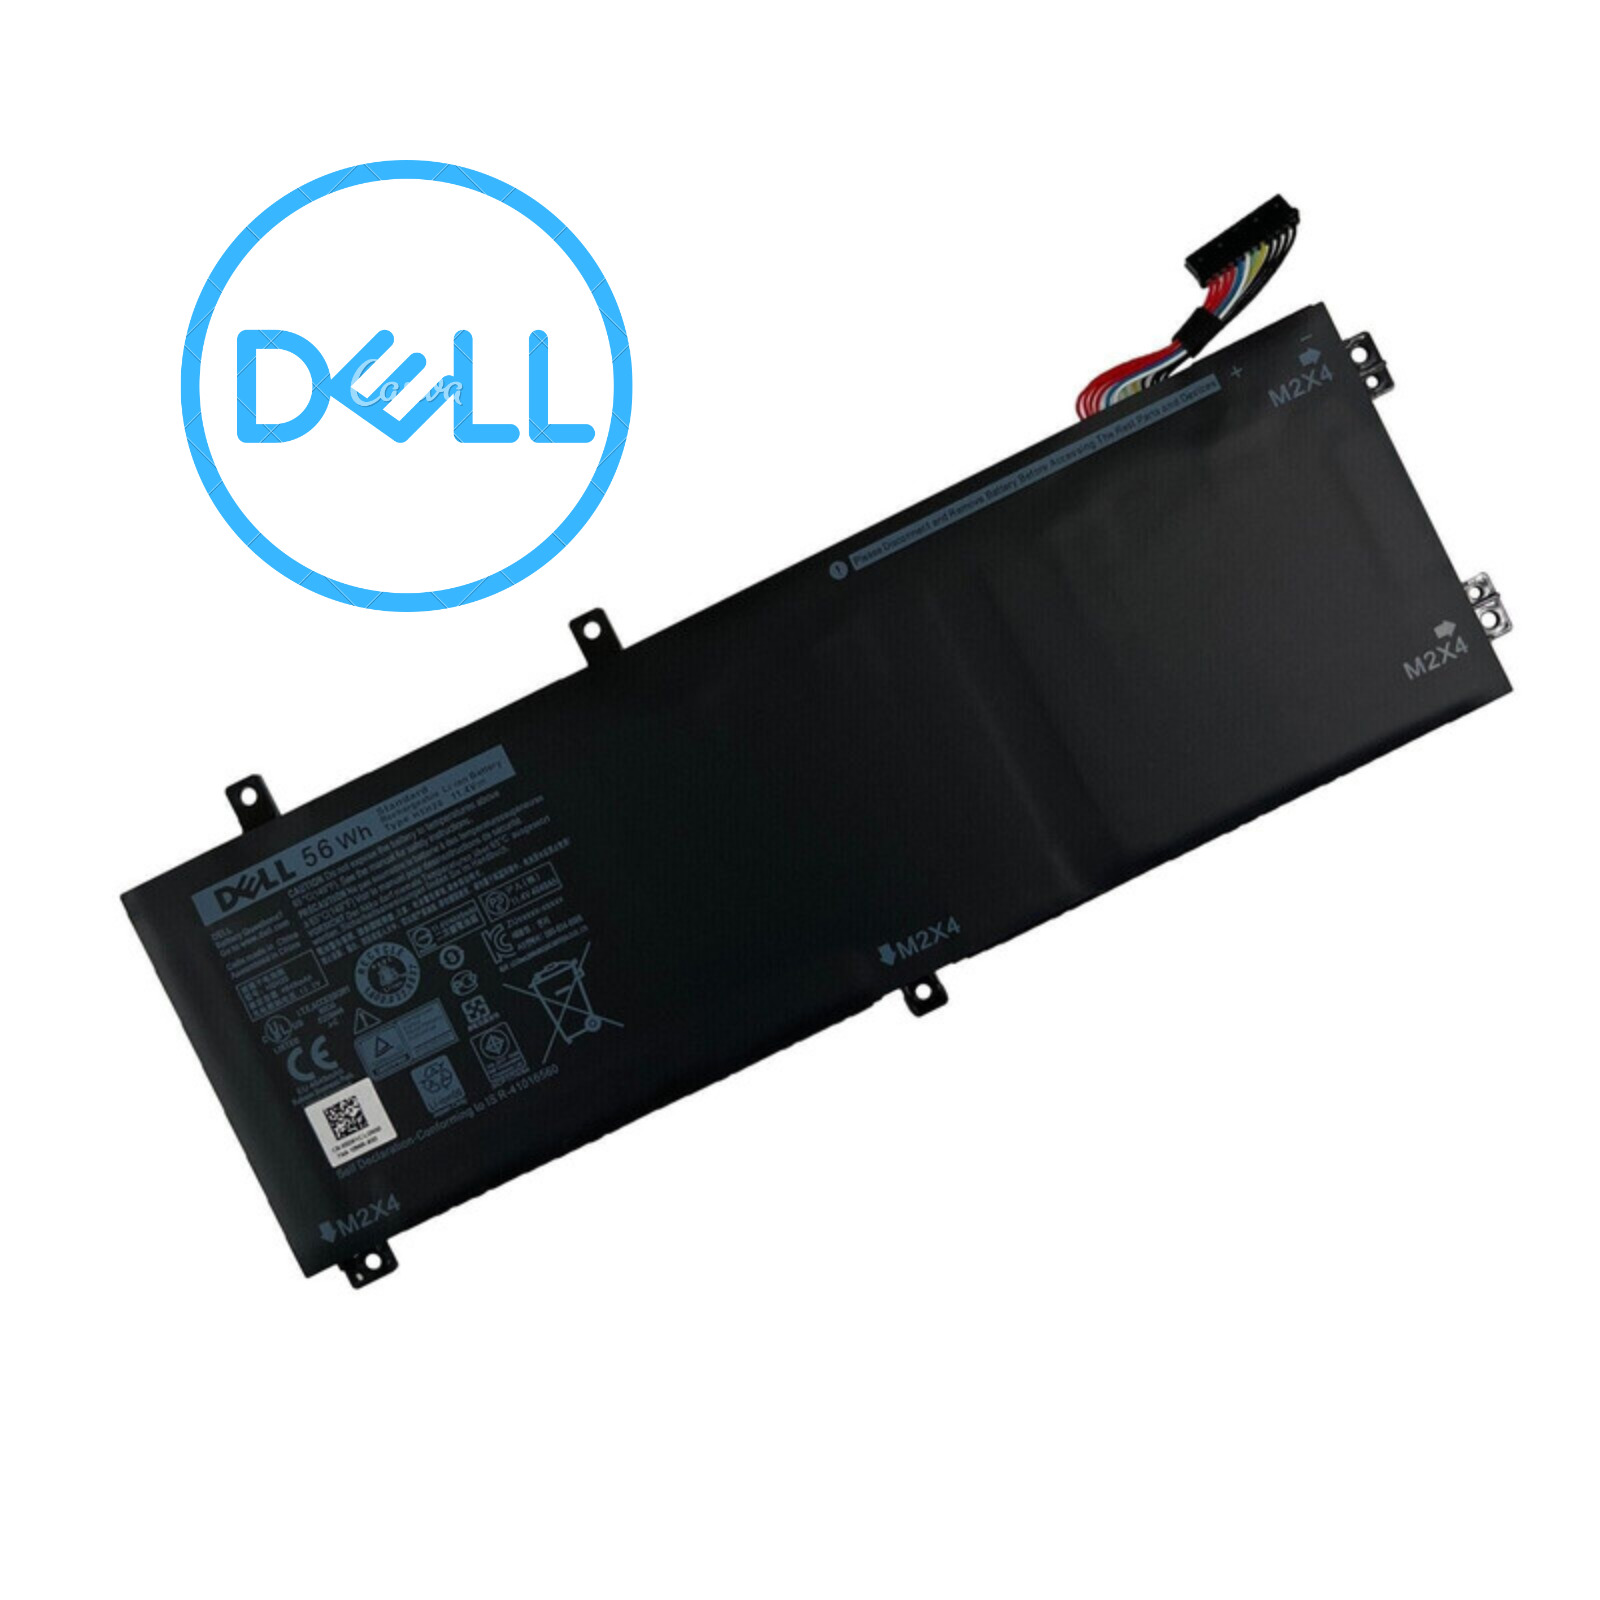 OEM H5H20 Battery For Dell Precision 5510 5520 5530 5540 XPS 15 9560 9550 9570